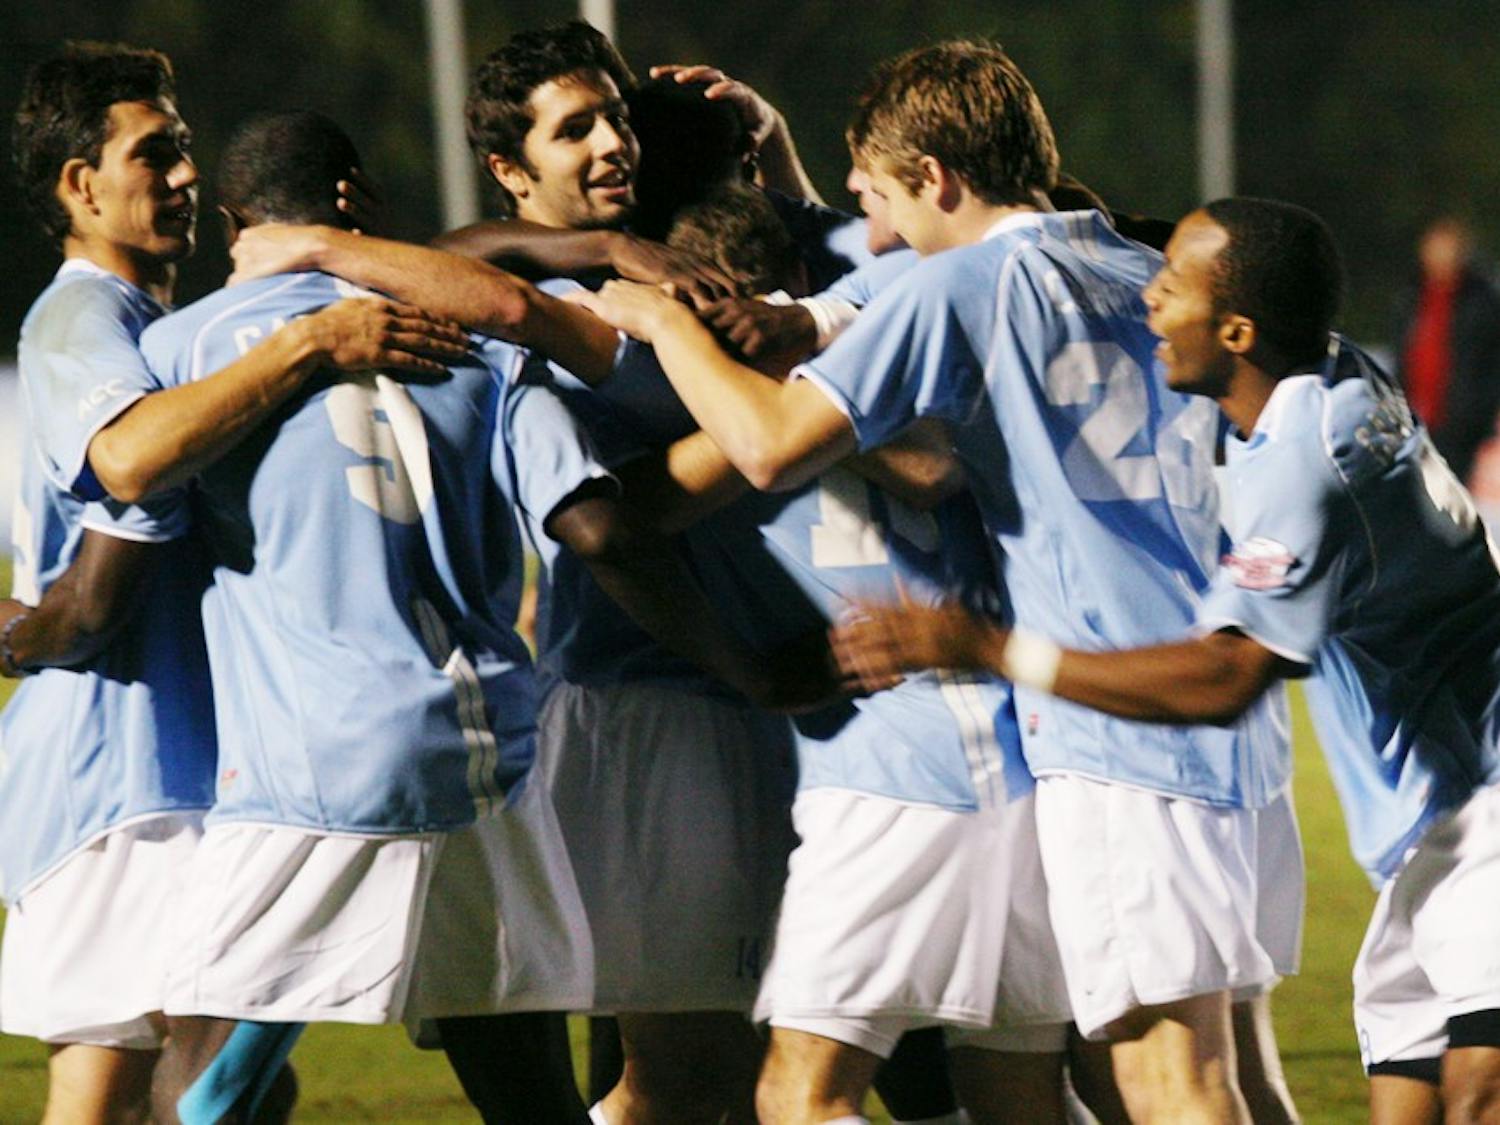 The North Carolina men’s soccer team celebrates one of their four goals against the N.C. State Wolfpack at WakeMed Soccer Park.  Wednesday’s win was the largest margin of victory in tournament history for UNC.